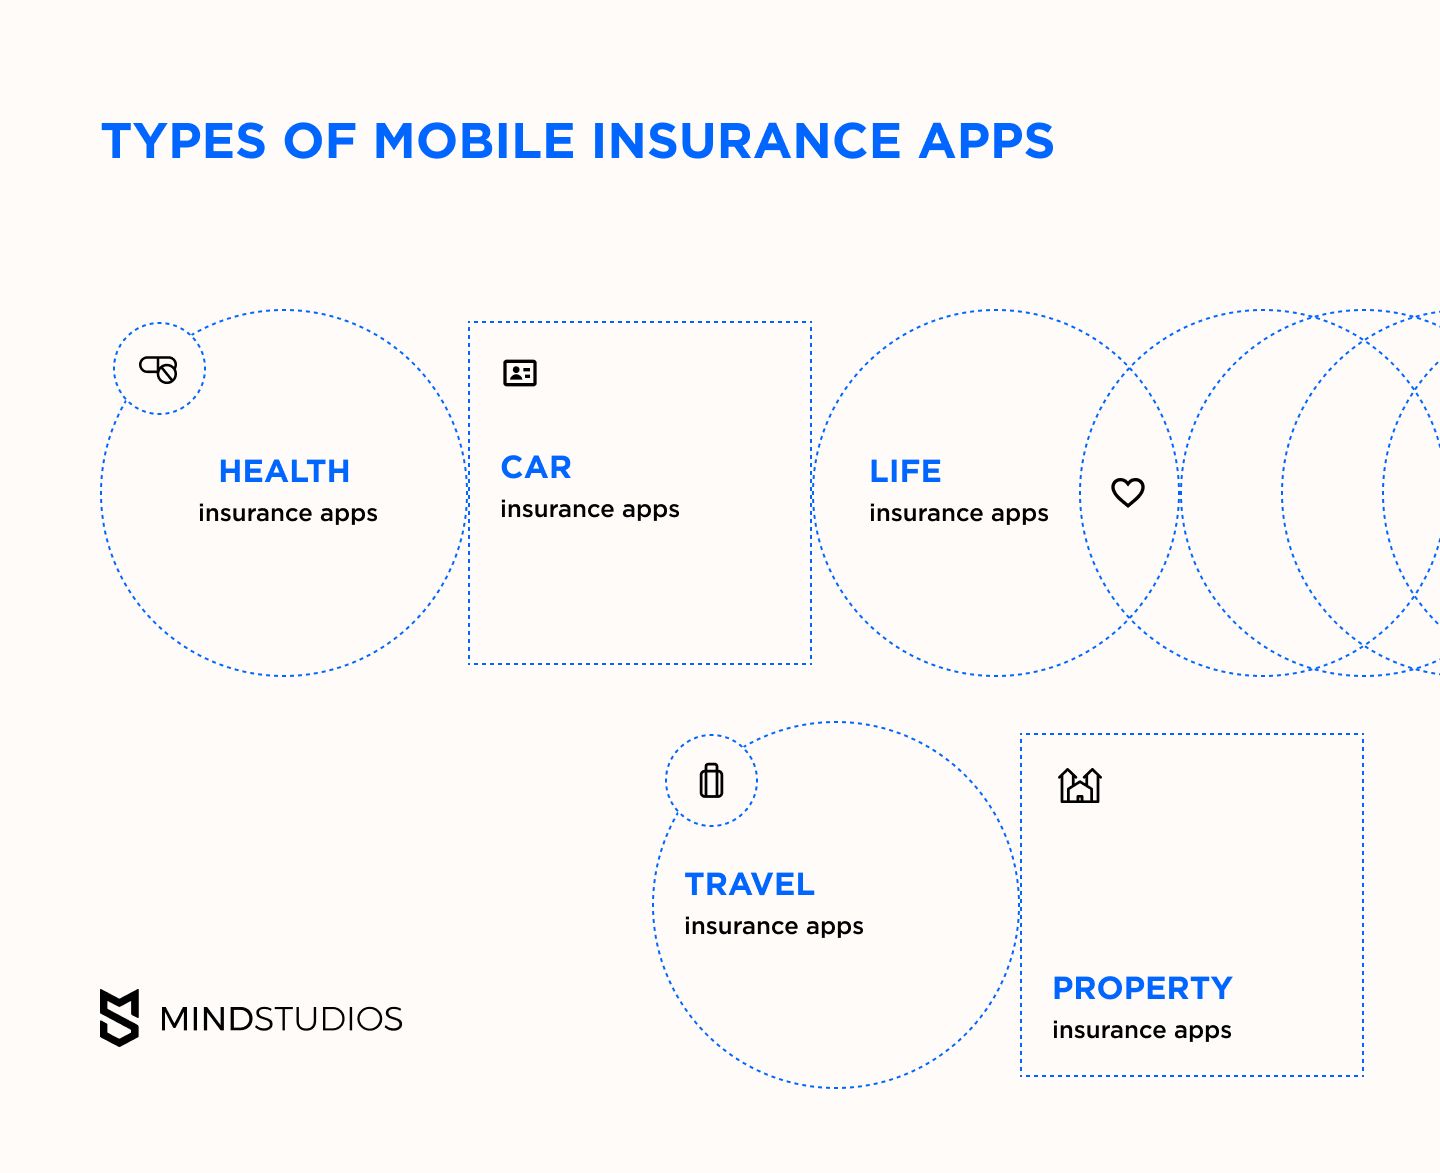 Types of mobile insurance apps